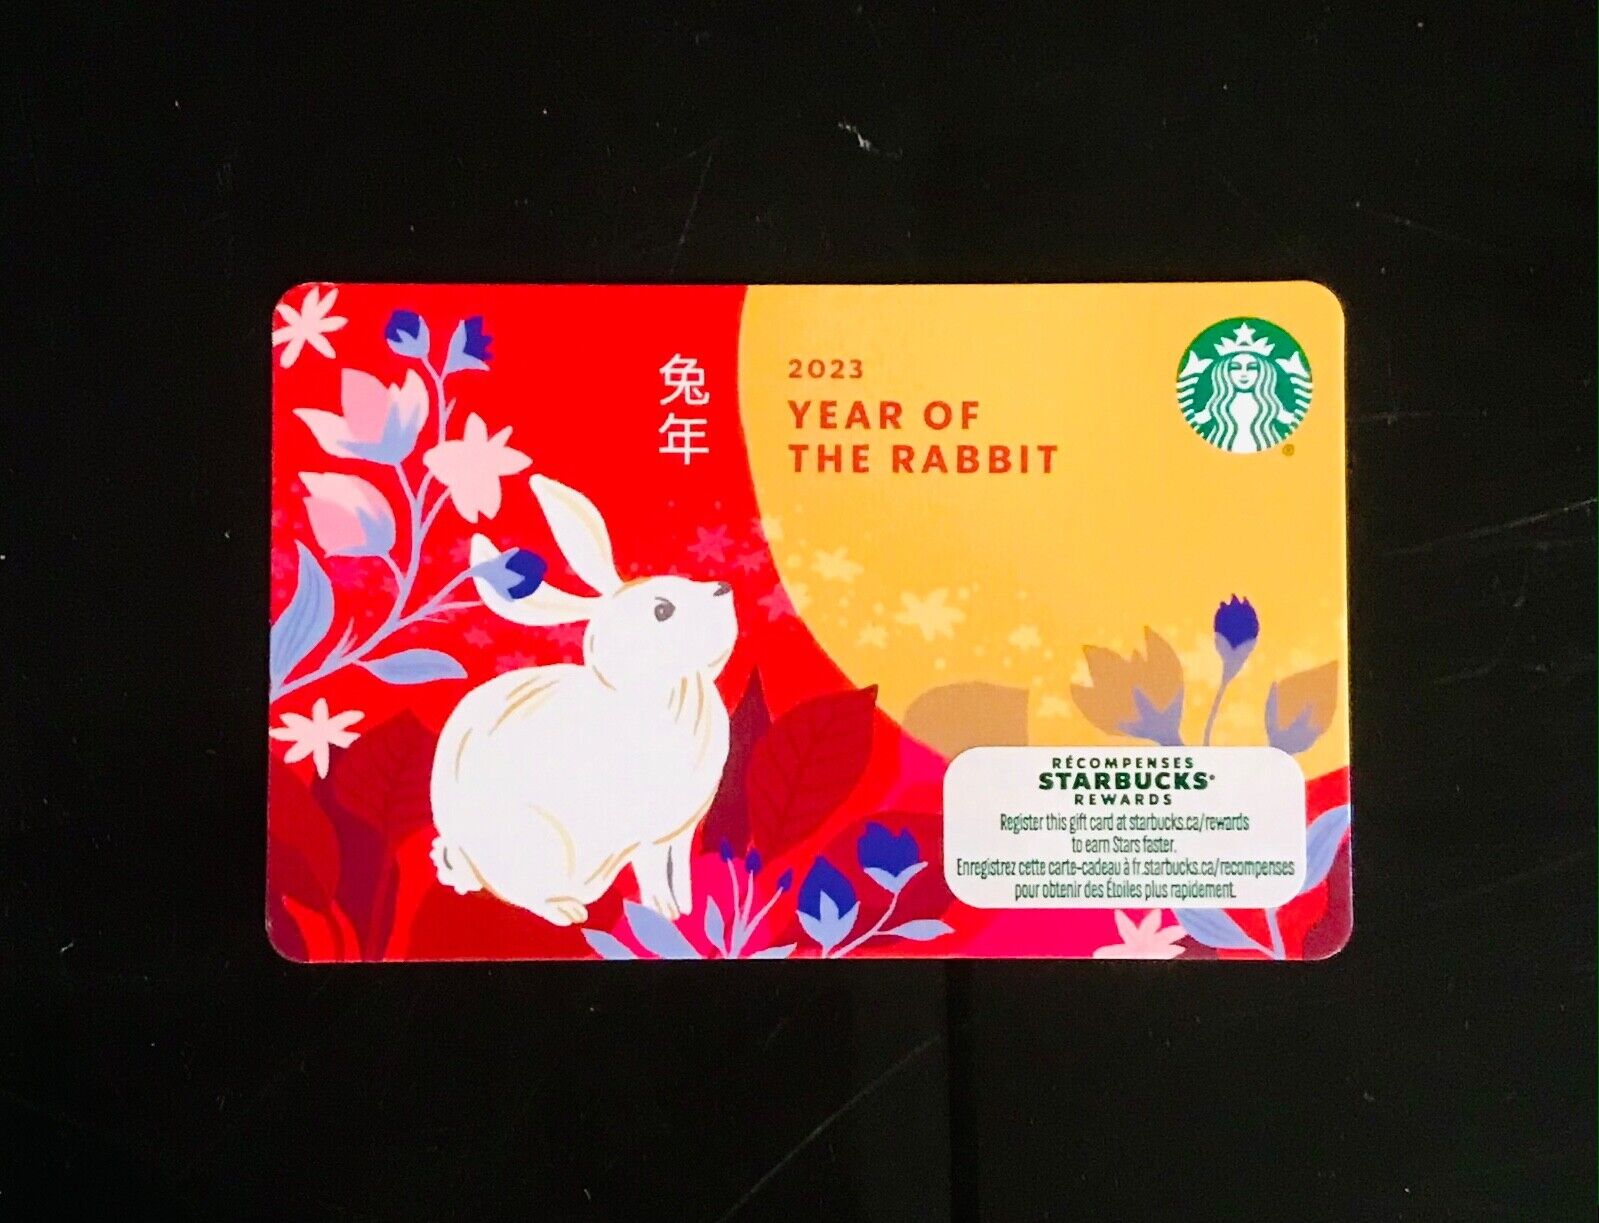 STARBUCKS NEW YEAR LUNAR GIFT CARD COLLECTIONS-Choose One or More